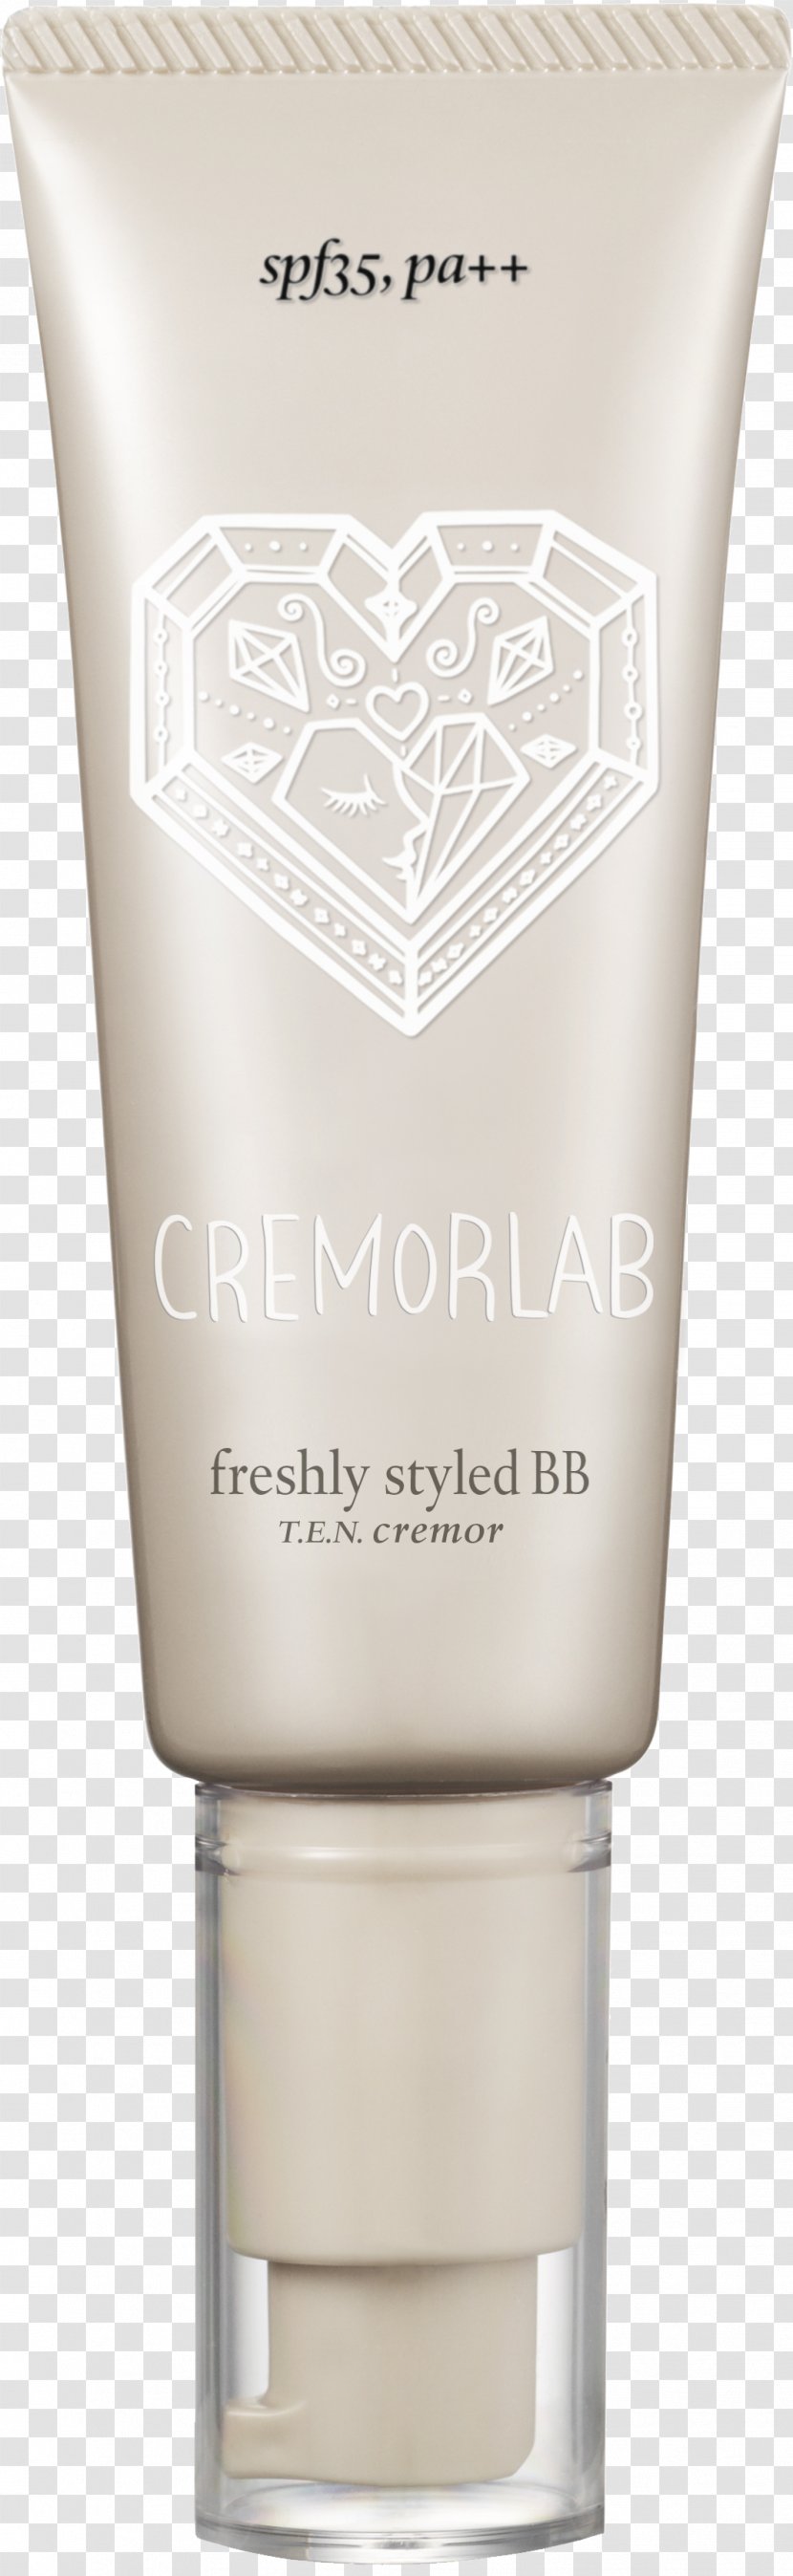 Cream Lotion Image Skincare The MAX Stem Cell Facial Cleanser Cosmetics - Shiseido - BB Transparent PNG